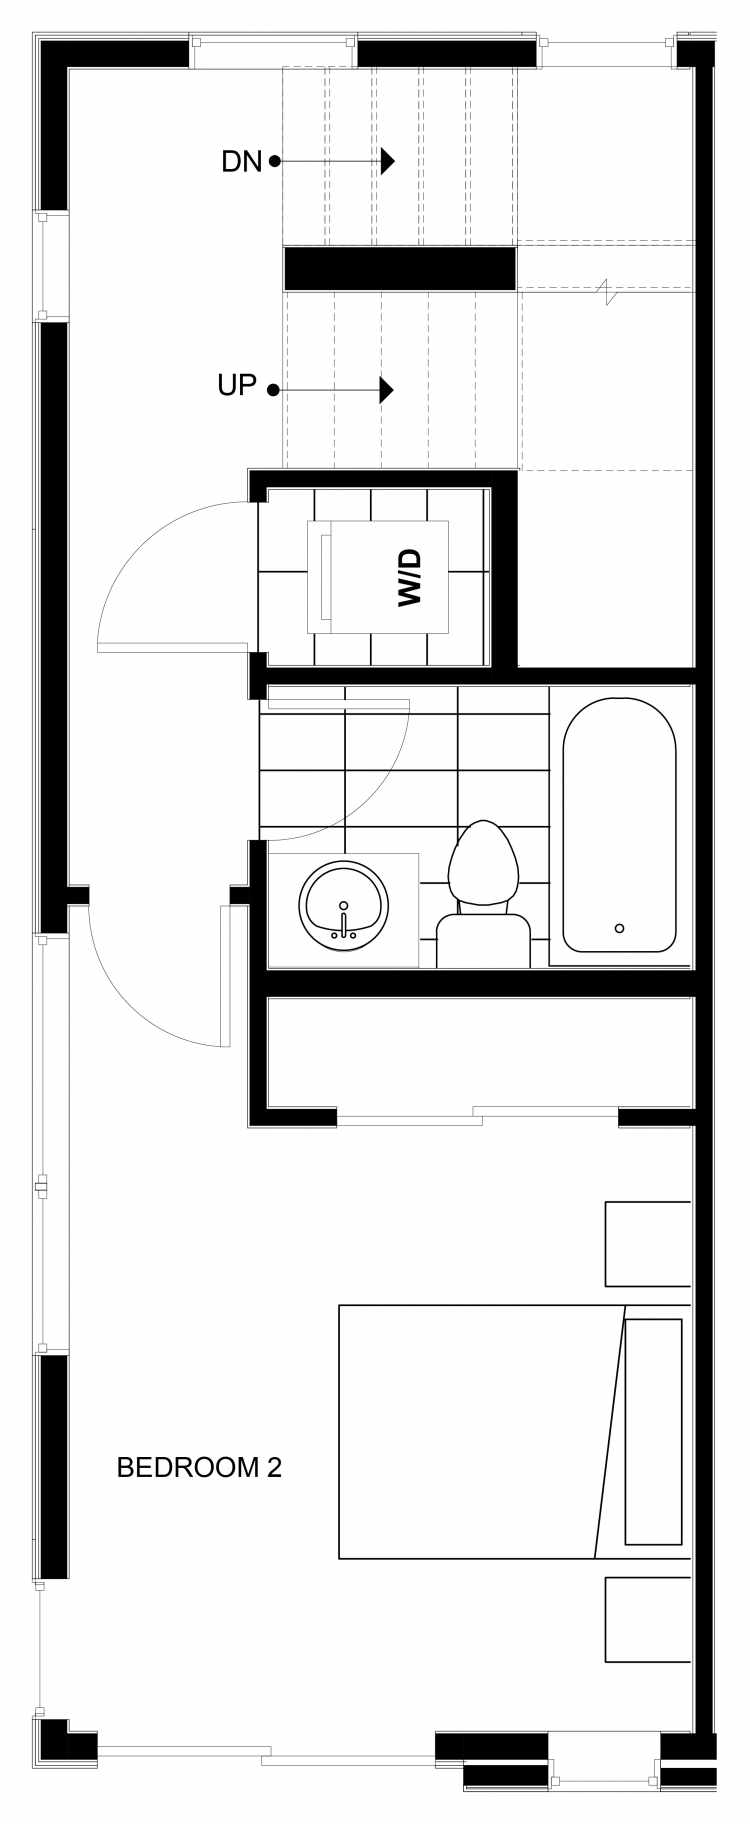 Third Floor Plan of 1544 15th Ave E, One of the Larrabee Townhomes in Capitol Hill